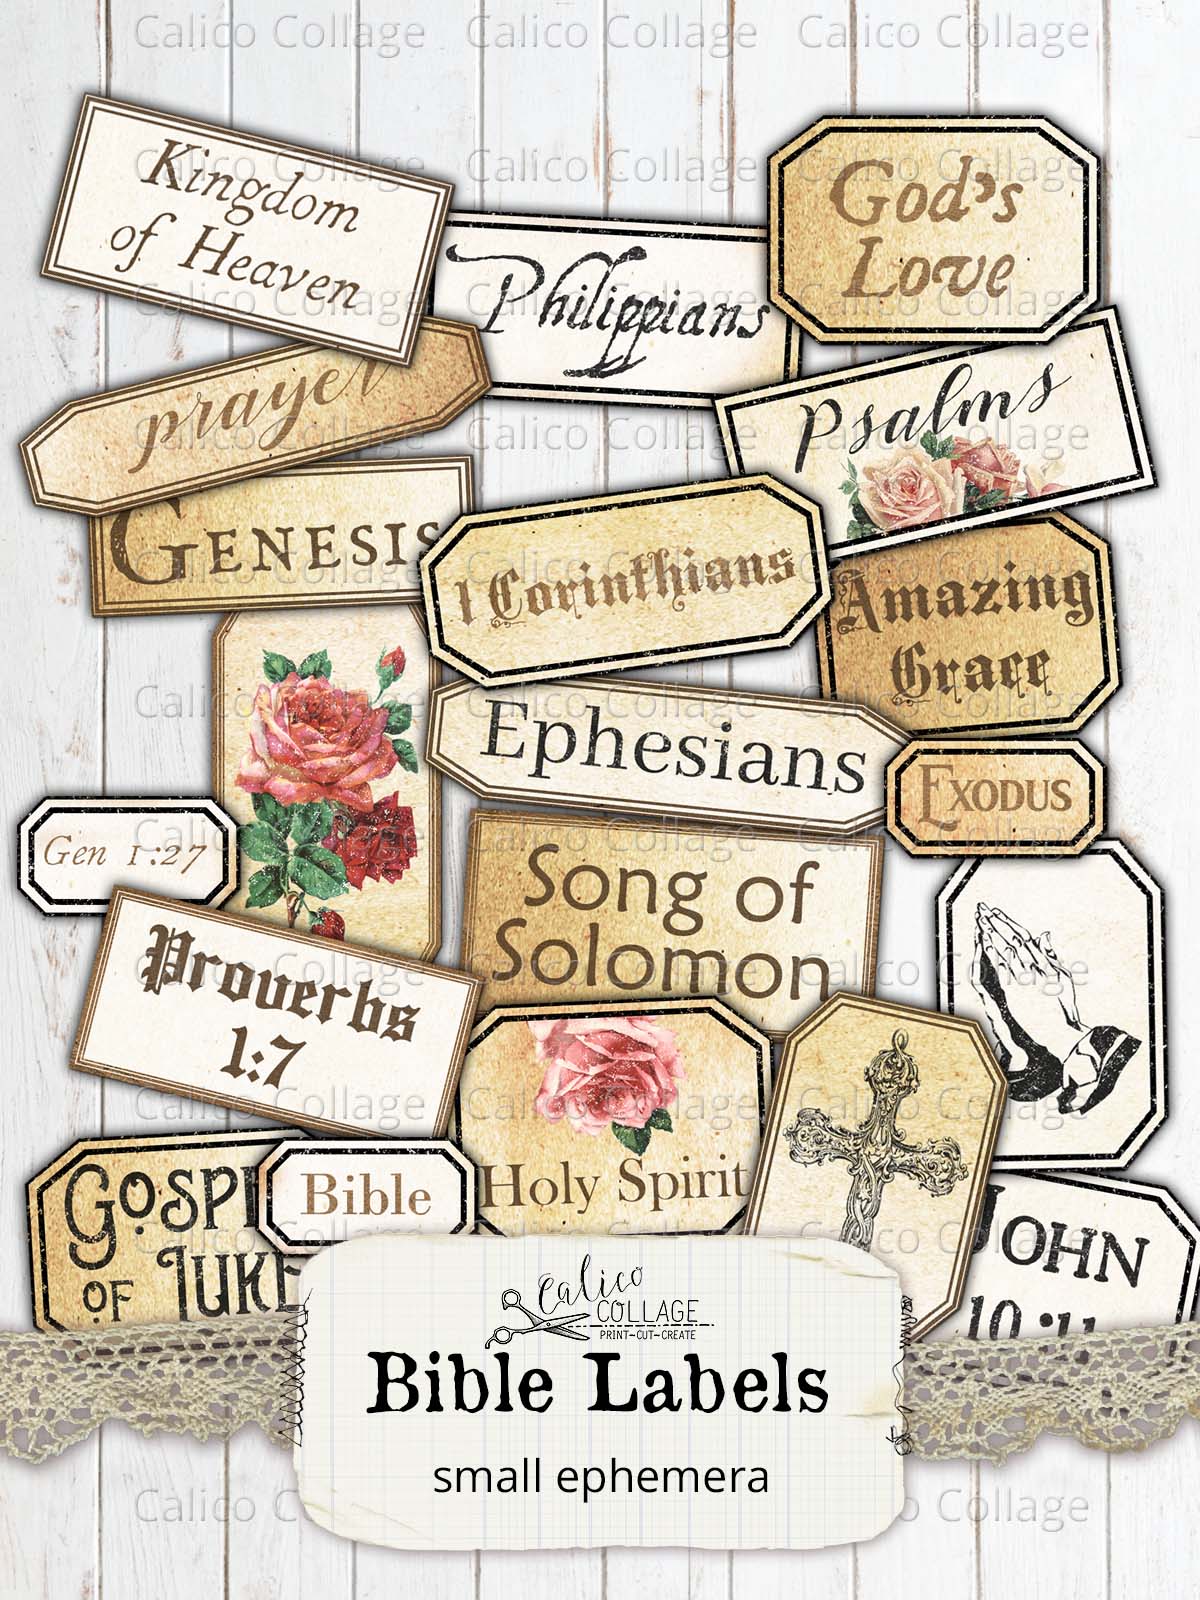 Christian Faith Vintage Junk Journal Pages And Ephemera: Over 210 Catholic  & Bible Scripture Themed Labels, Postcards, Tags, Papers & Ephemera Pieces   Collage And Many Other Paper Crafts: Publishing, Printopedia:  9798445574798